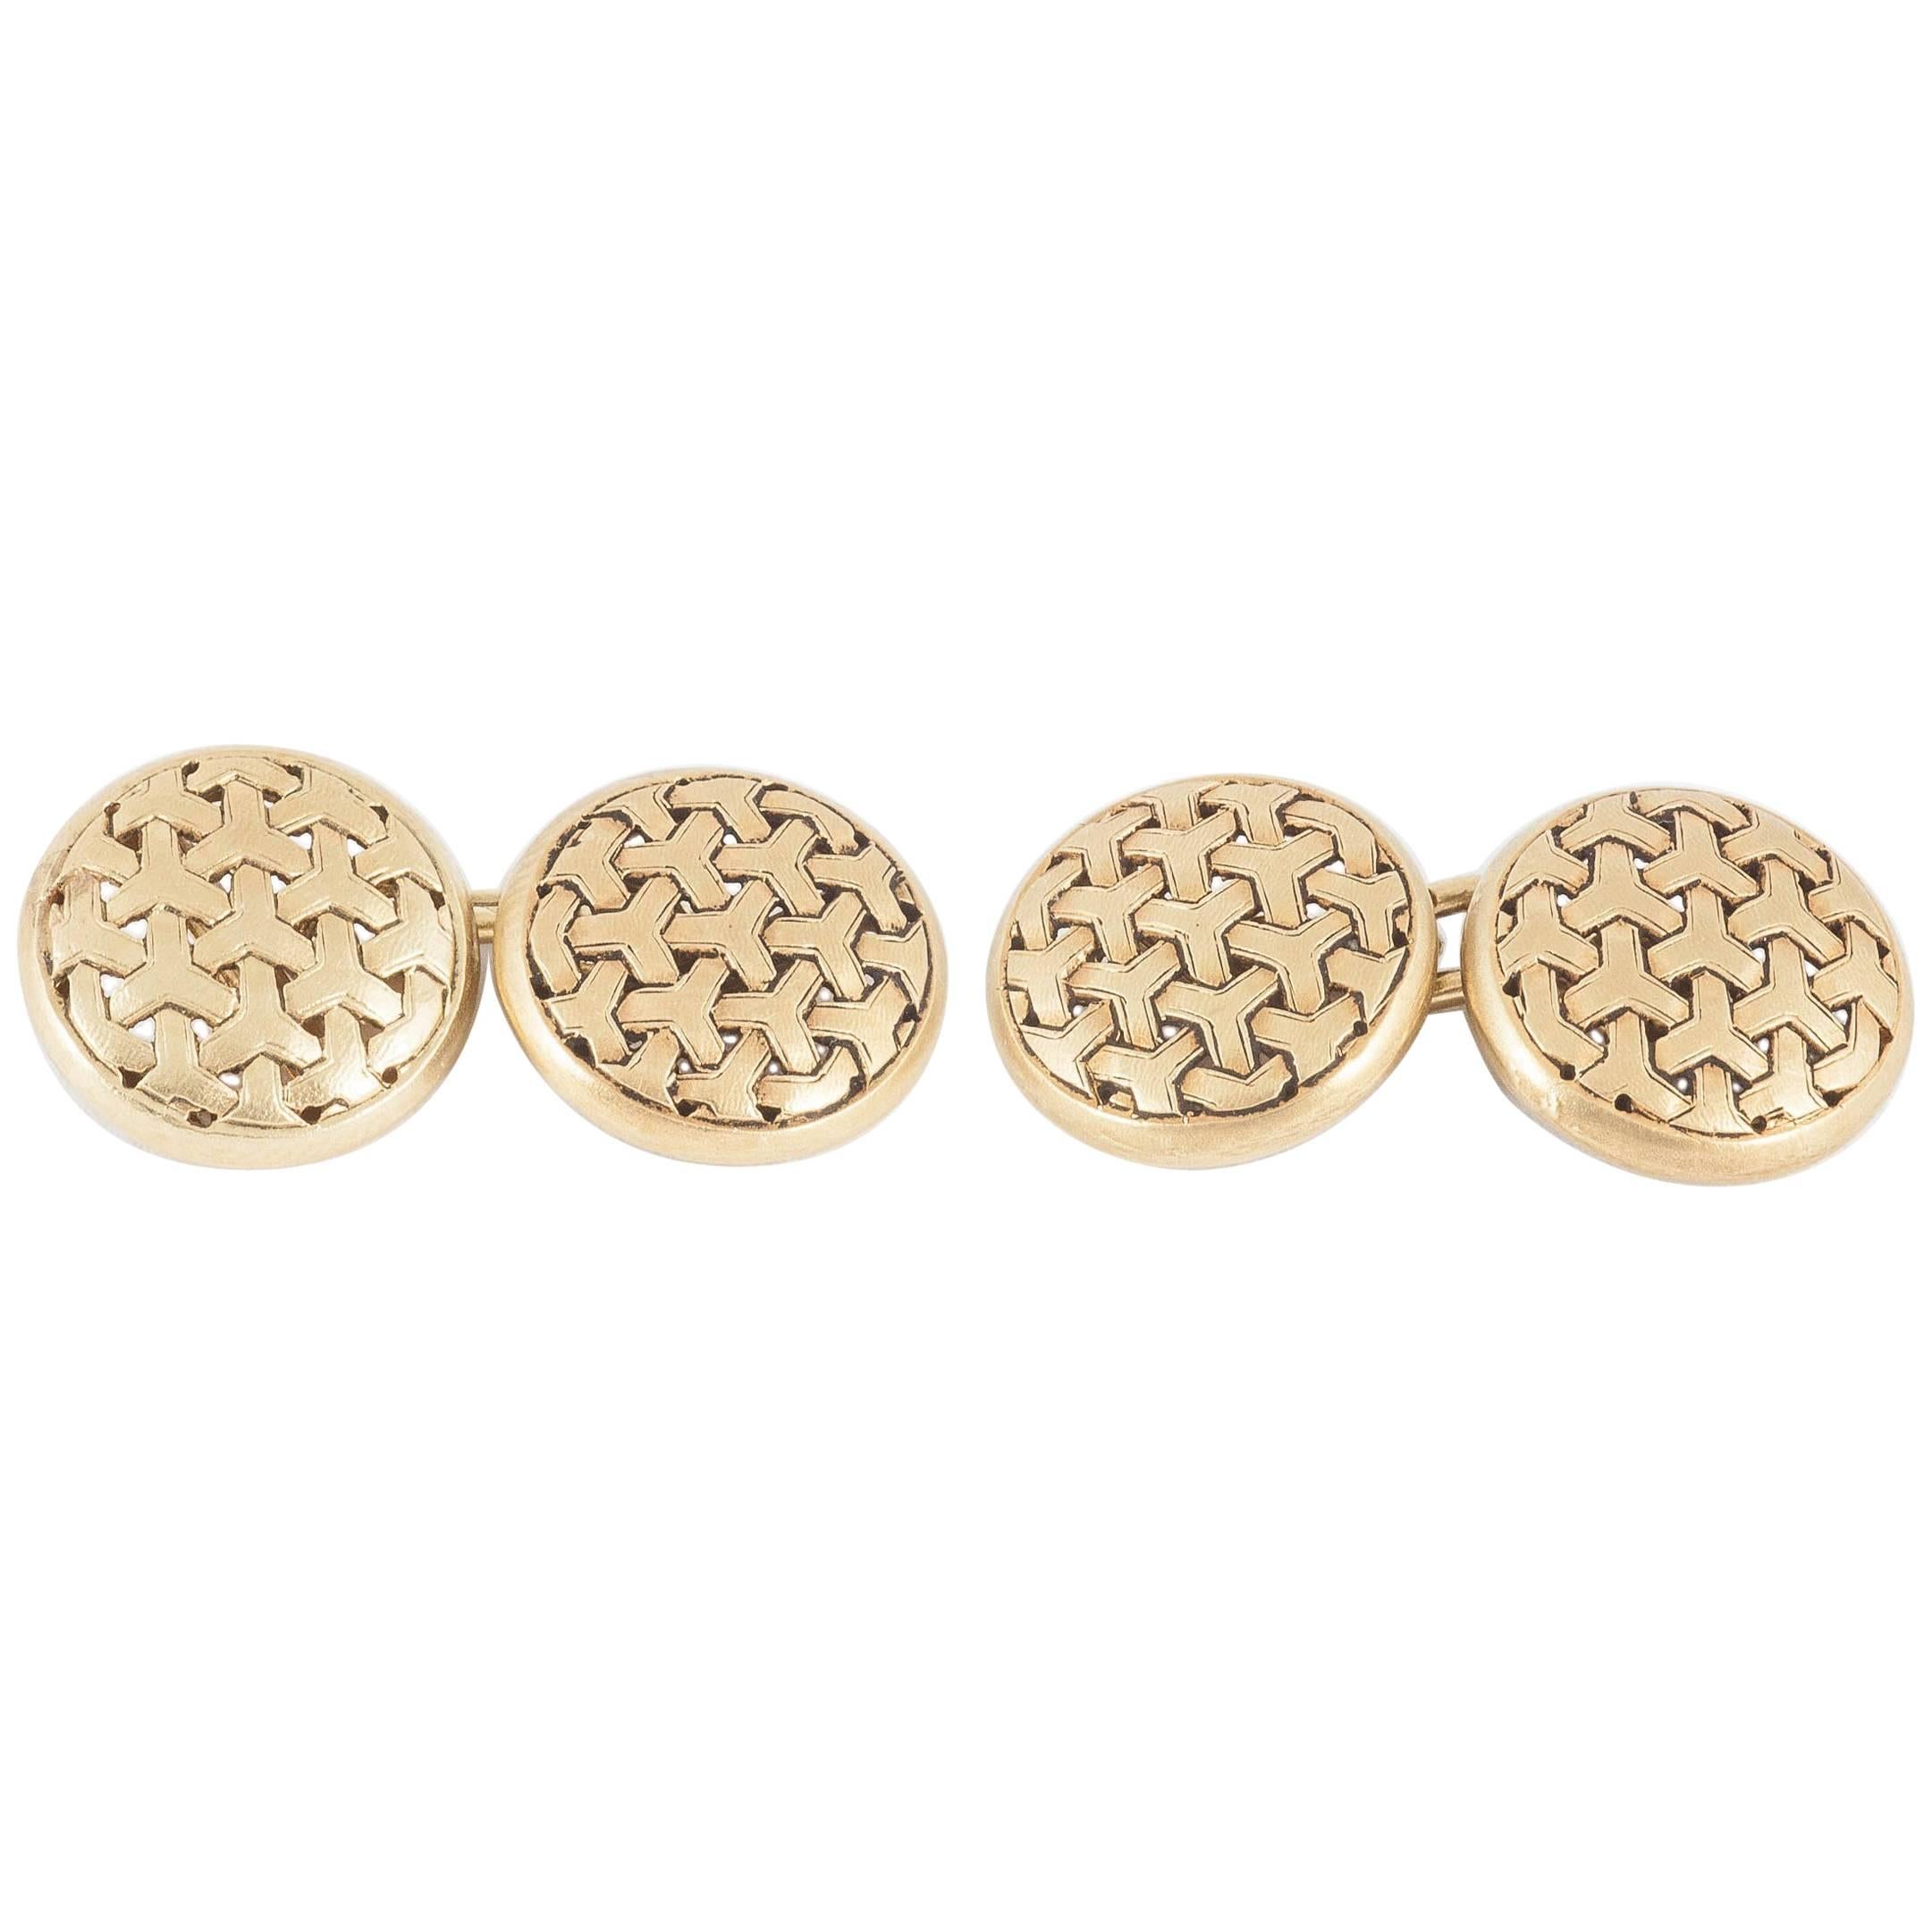  Cufflinks, openwork gold floral, French circa 1900 For Sale